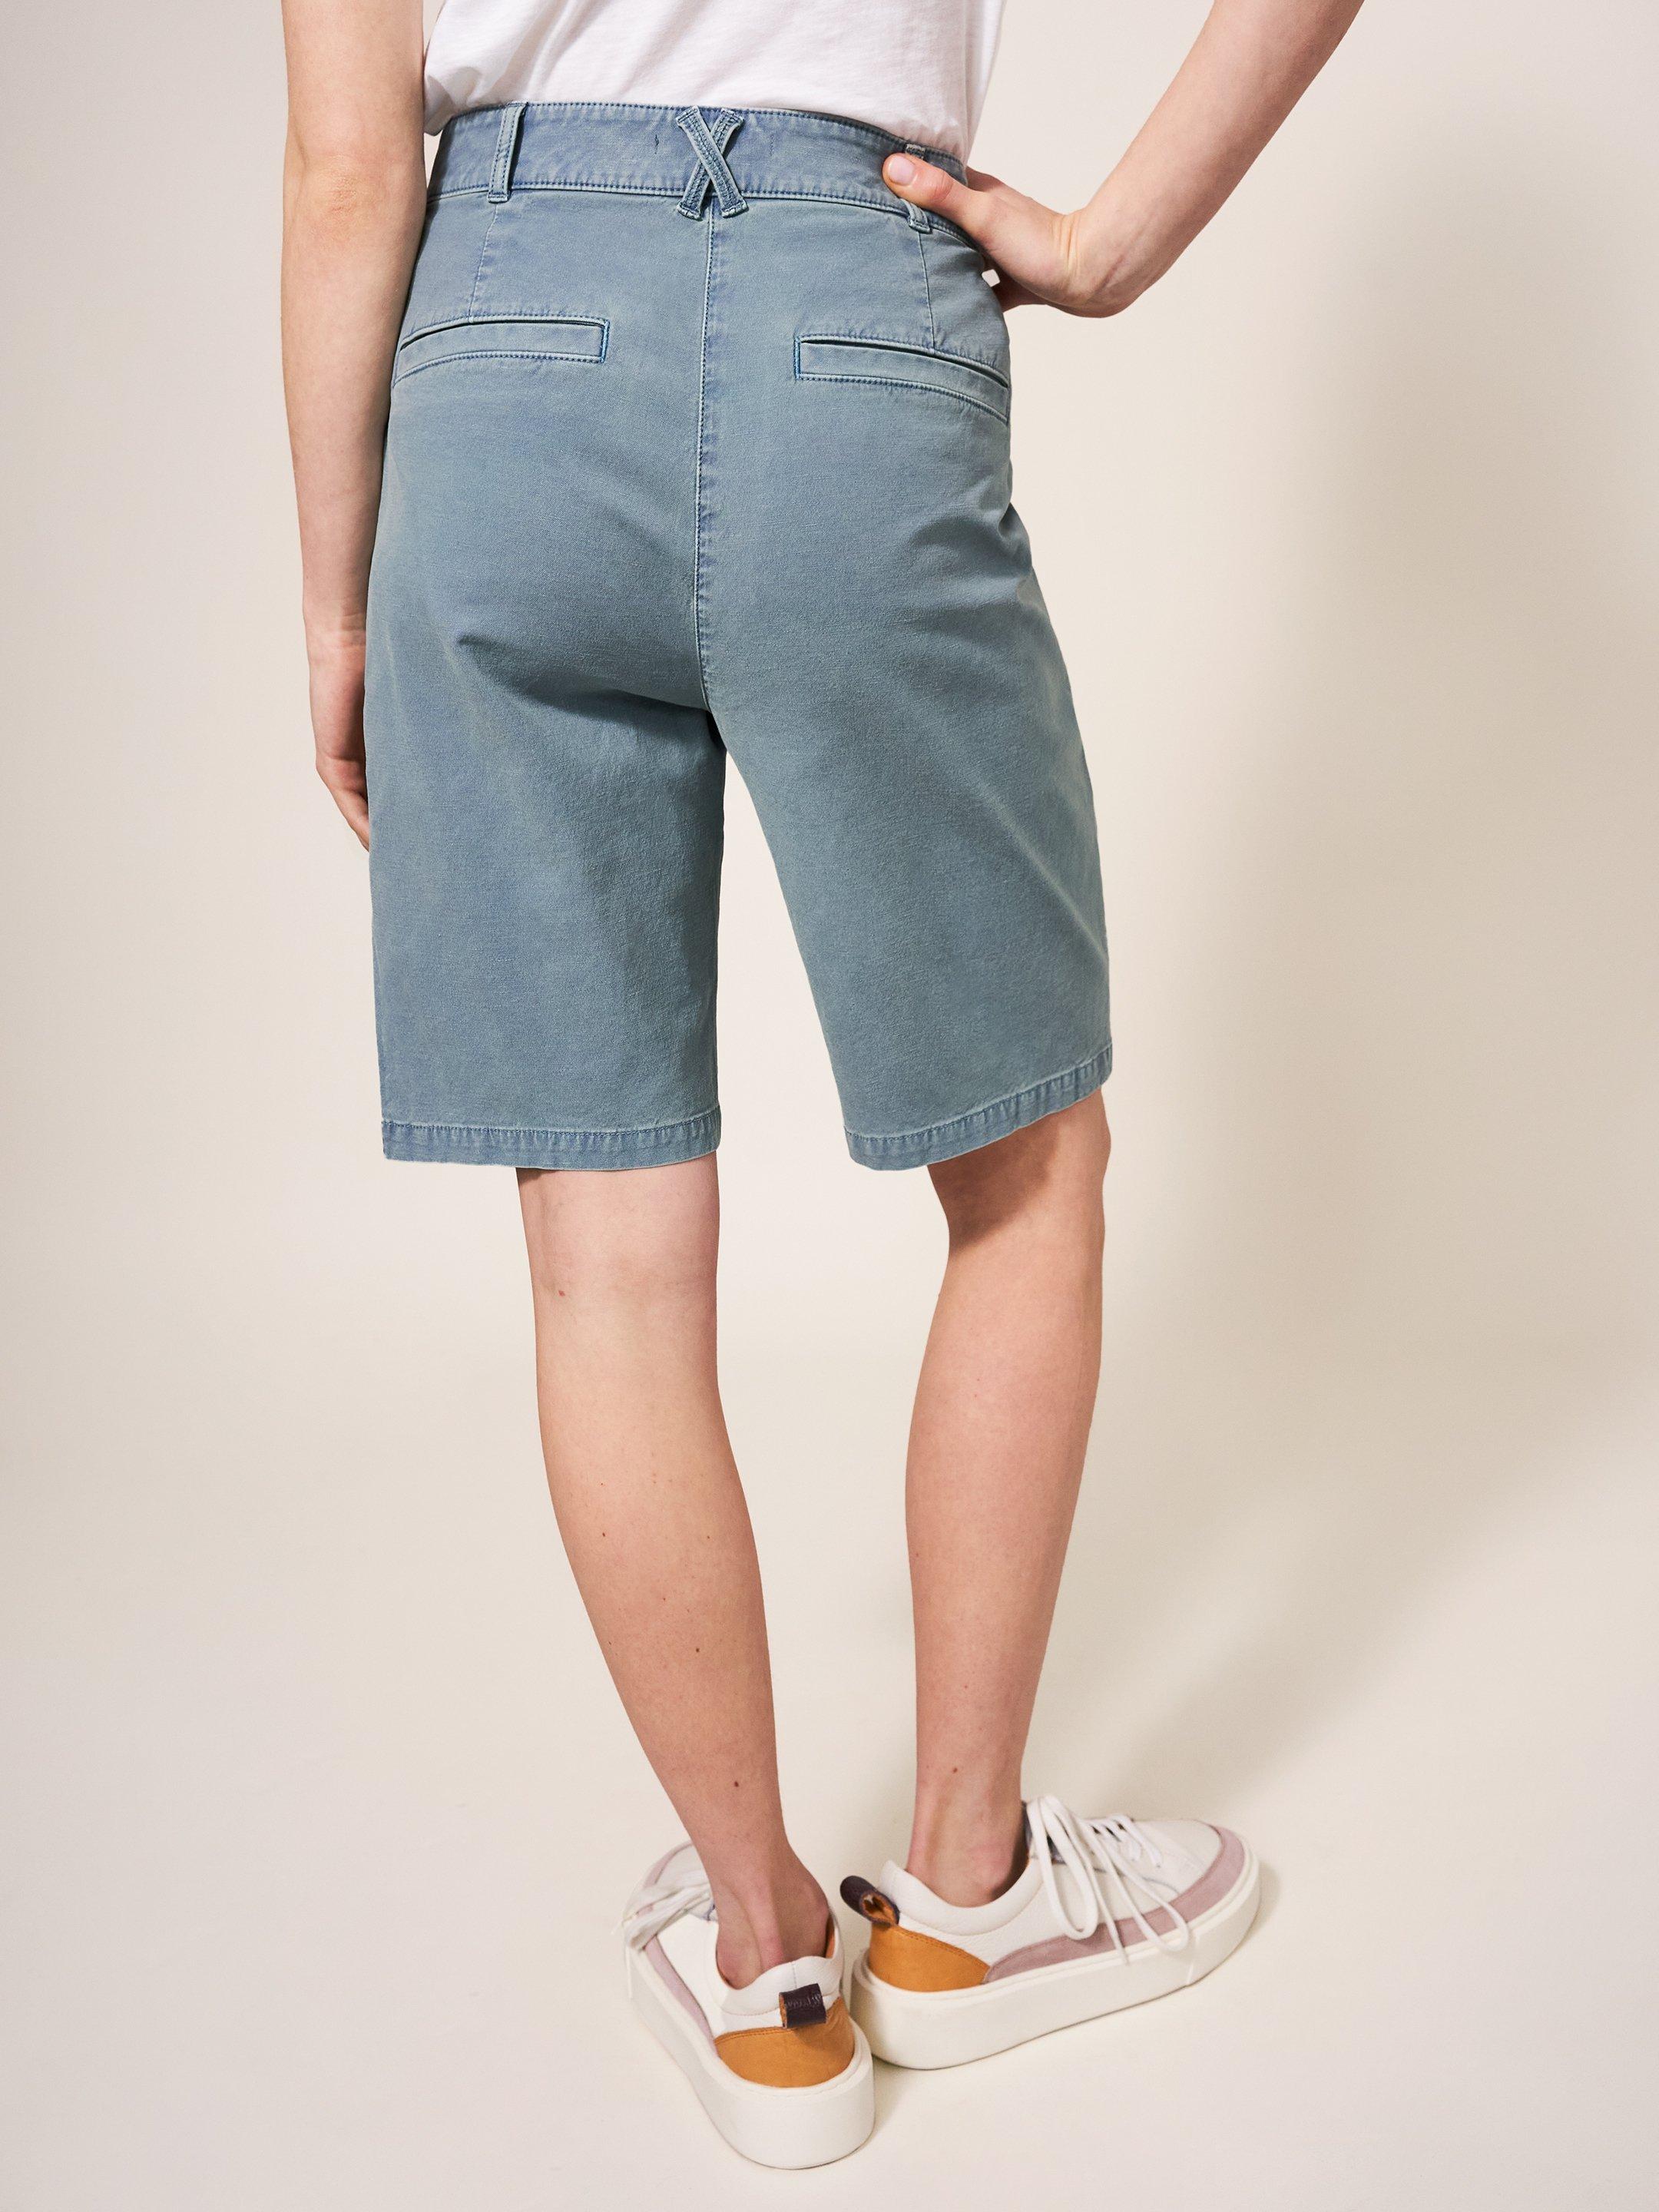 Twister Chino Short in MID TEAL - MODEL BACK